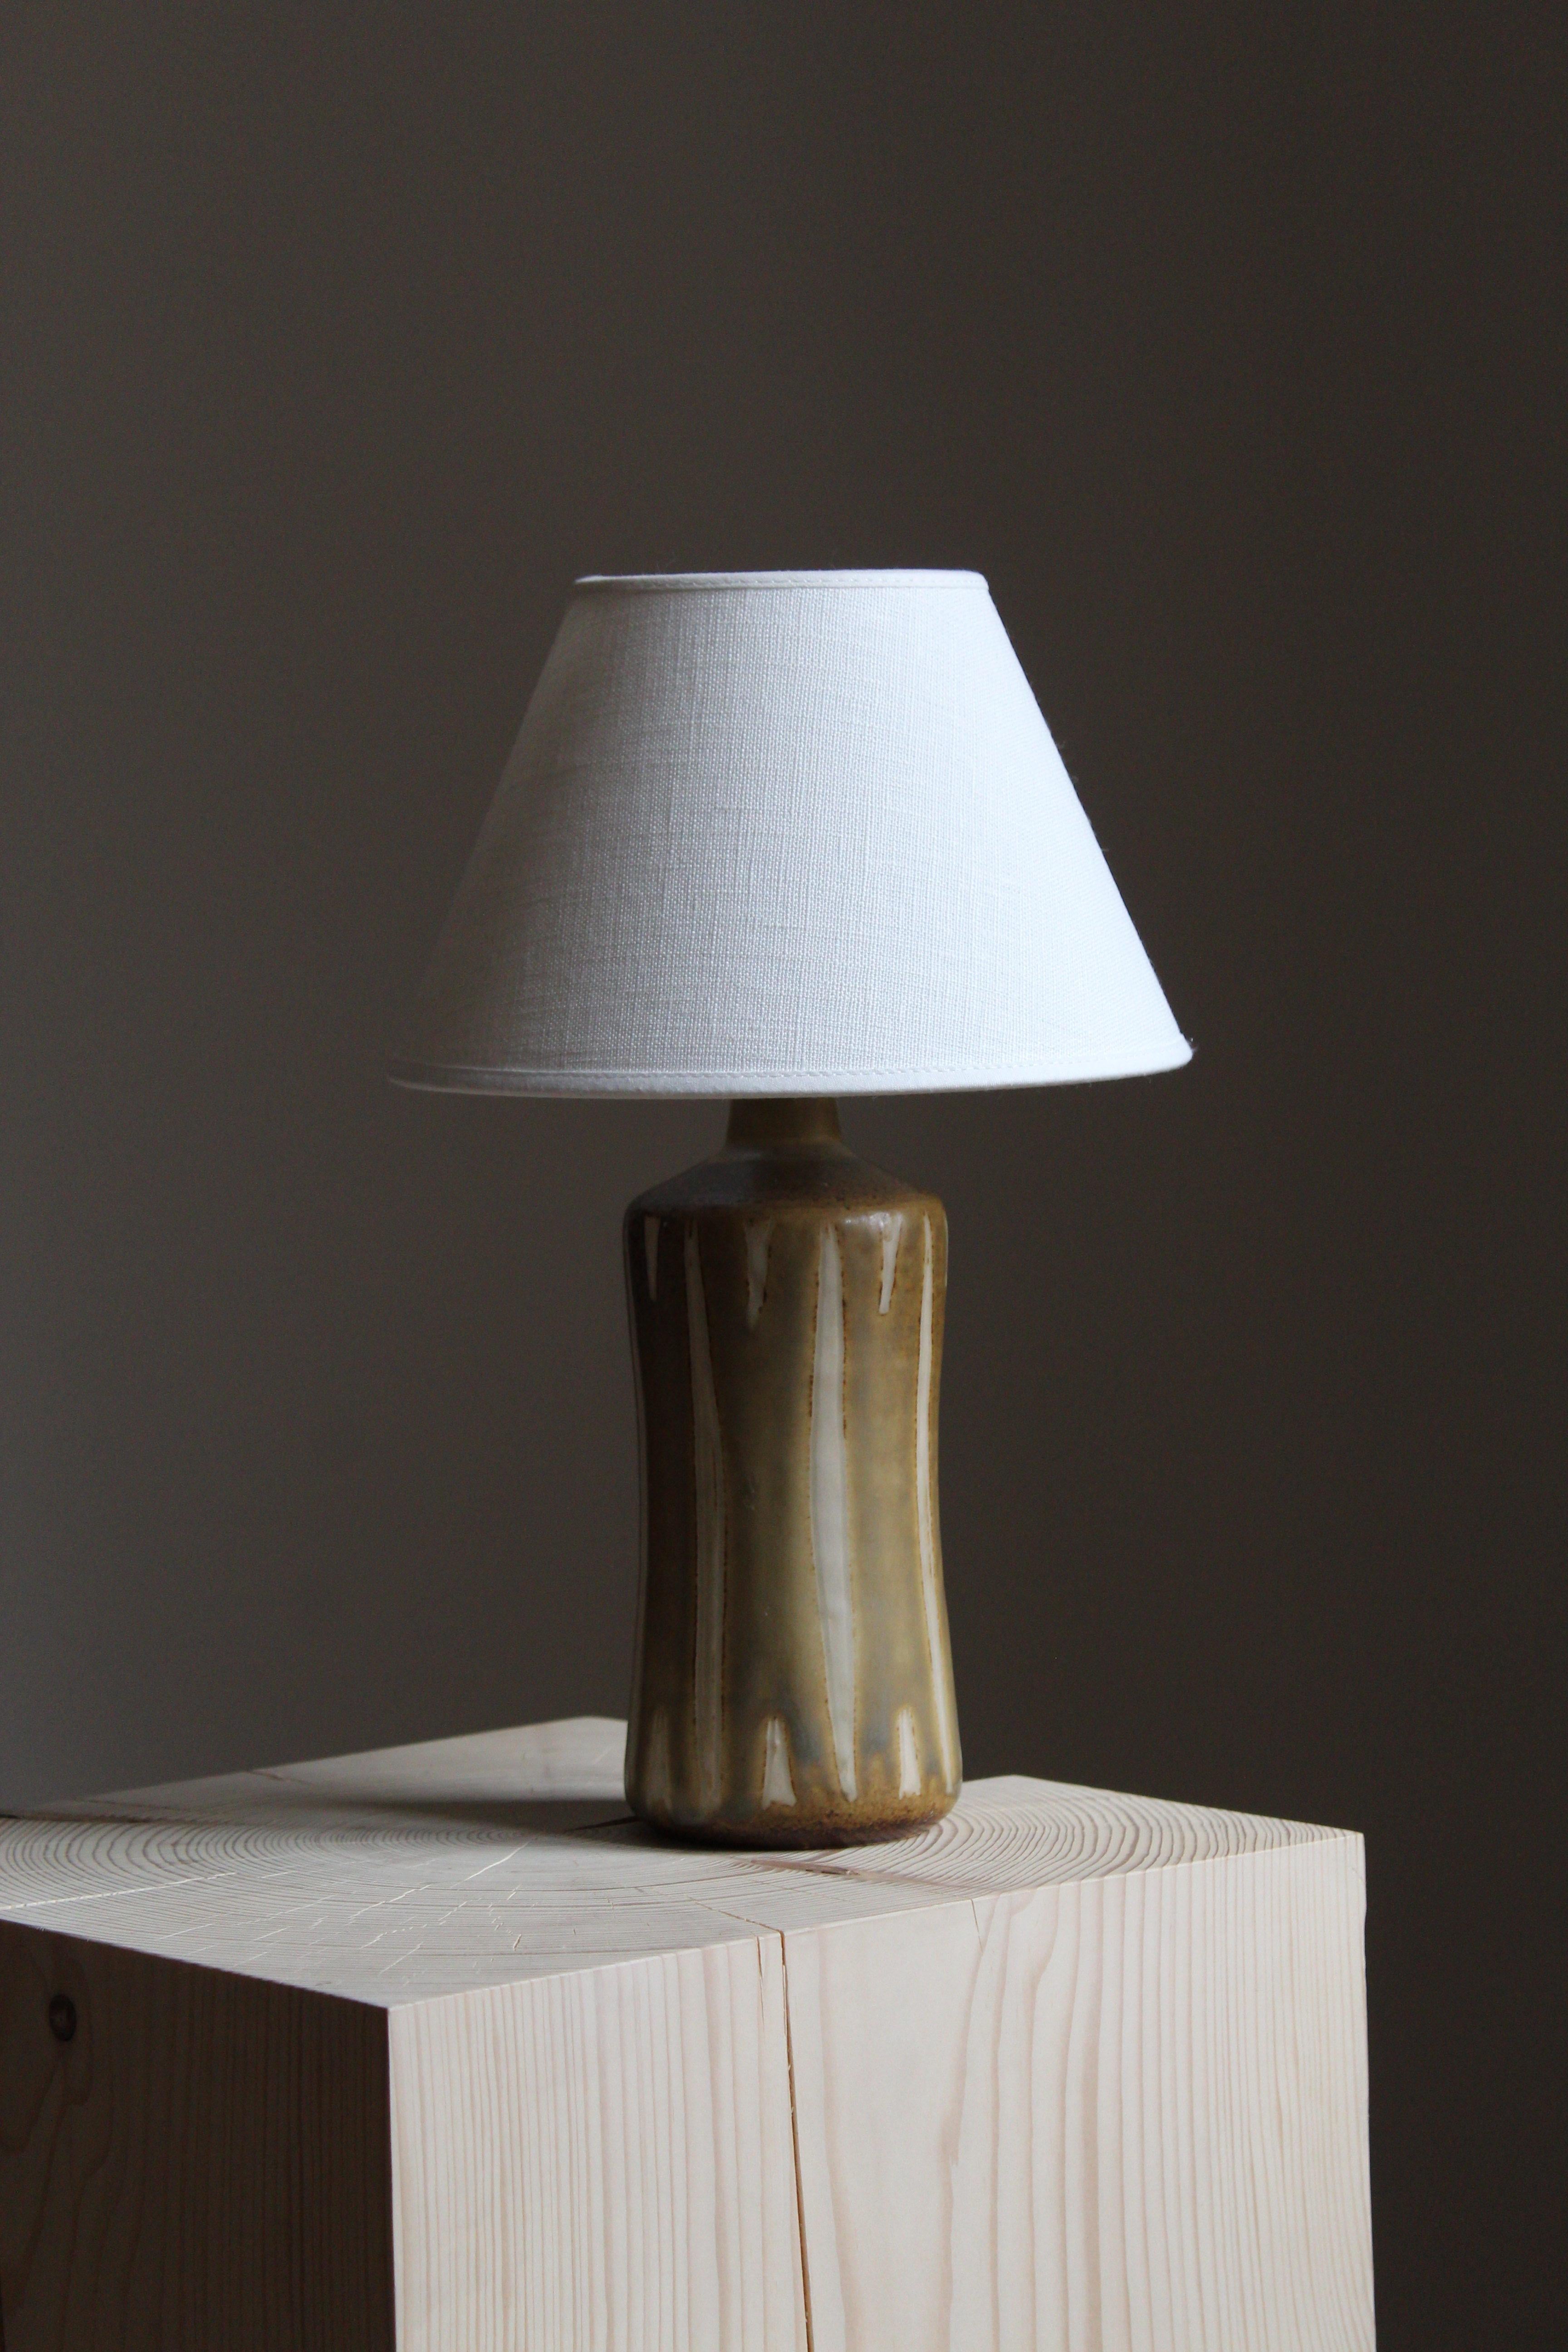 A table lamp, designed and produced by Kähler, Denmark, 1950s. Lampshade not included.

Glaze features green-brown-yellow-grey colors.

Other designers of the period include Axel Salto, Arne Bang, Upsala Ekeby, Saxbo, and Carl Harry Stålhane.